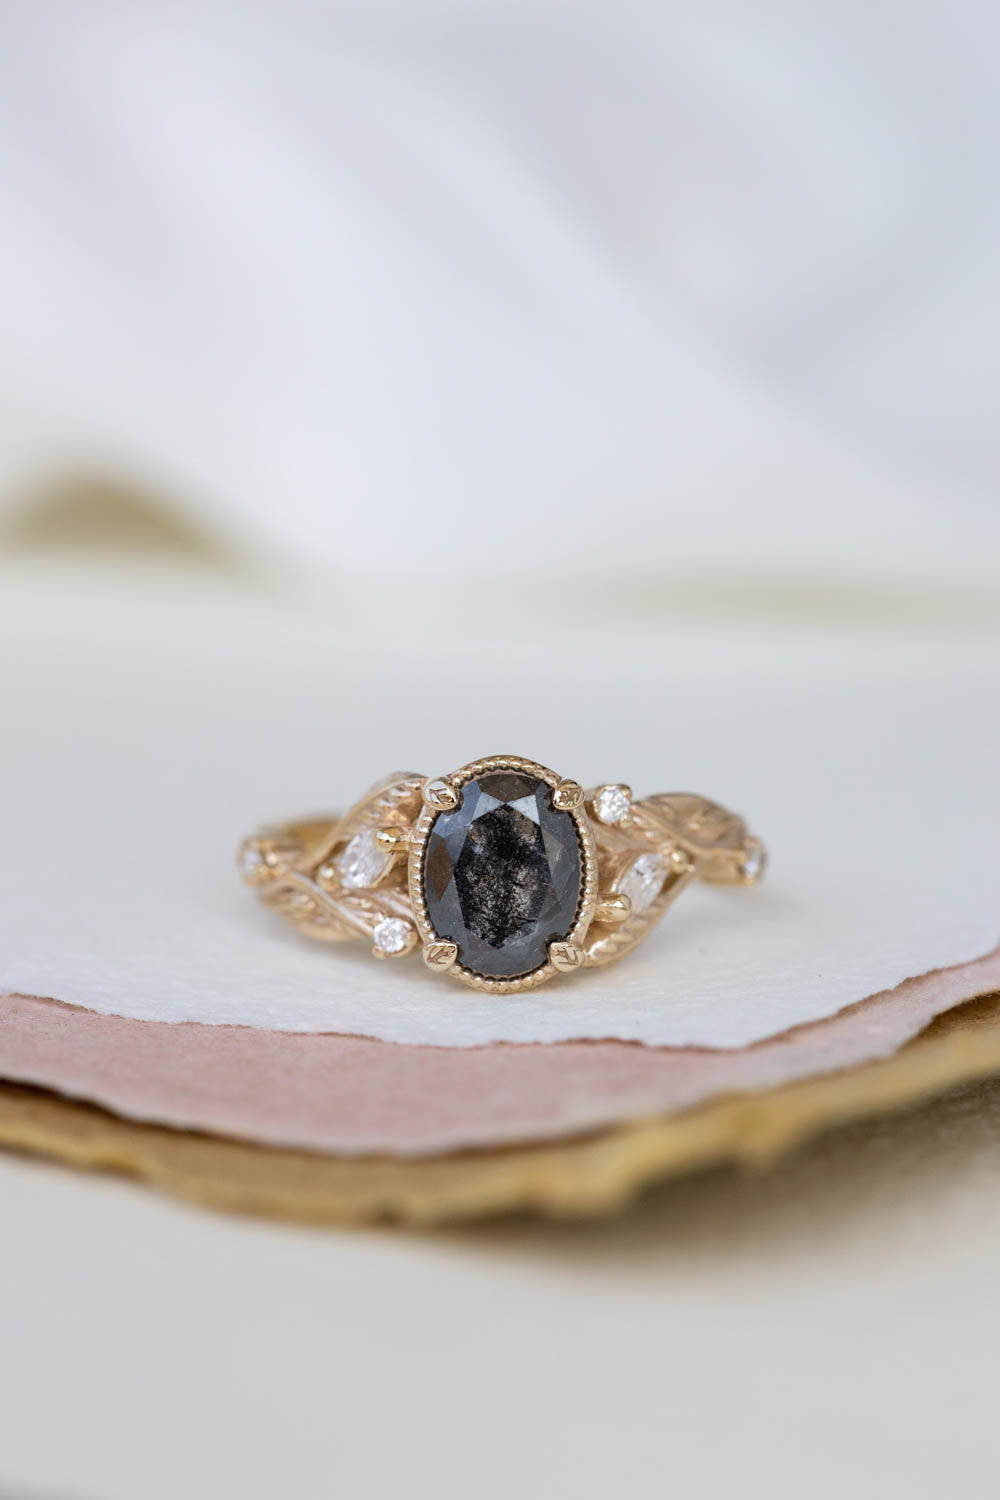 READY TO SHIP: Patricia ring in 14K yellow gold, natural salt and pepper diamond oval cut 8x6 mm, moissanites, AVAILABLE RING SIZES: 6-8US - Eden Garden Jewelry™